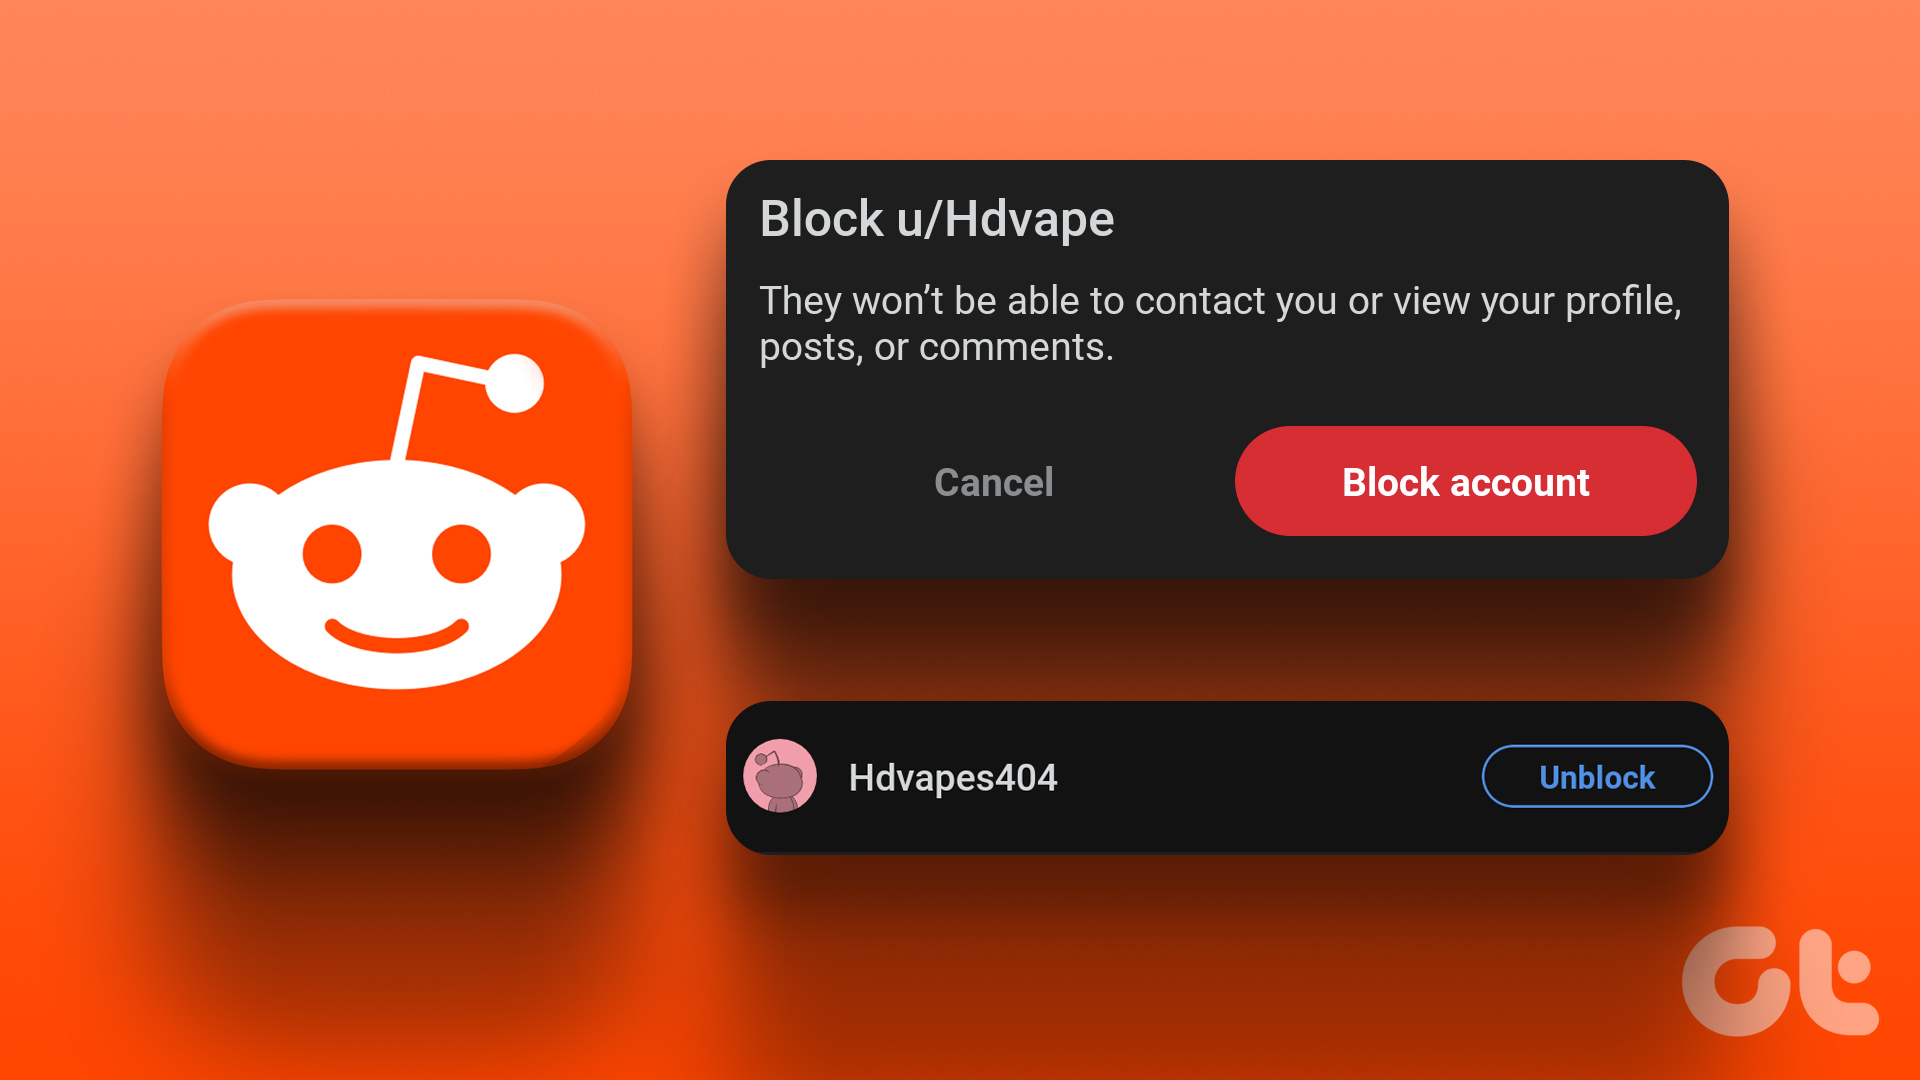 How to Block or Unblock Someone on Reddit